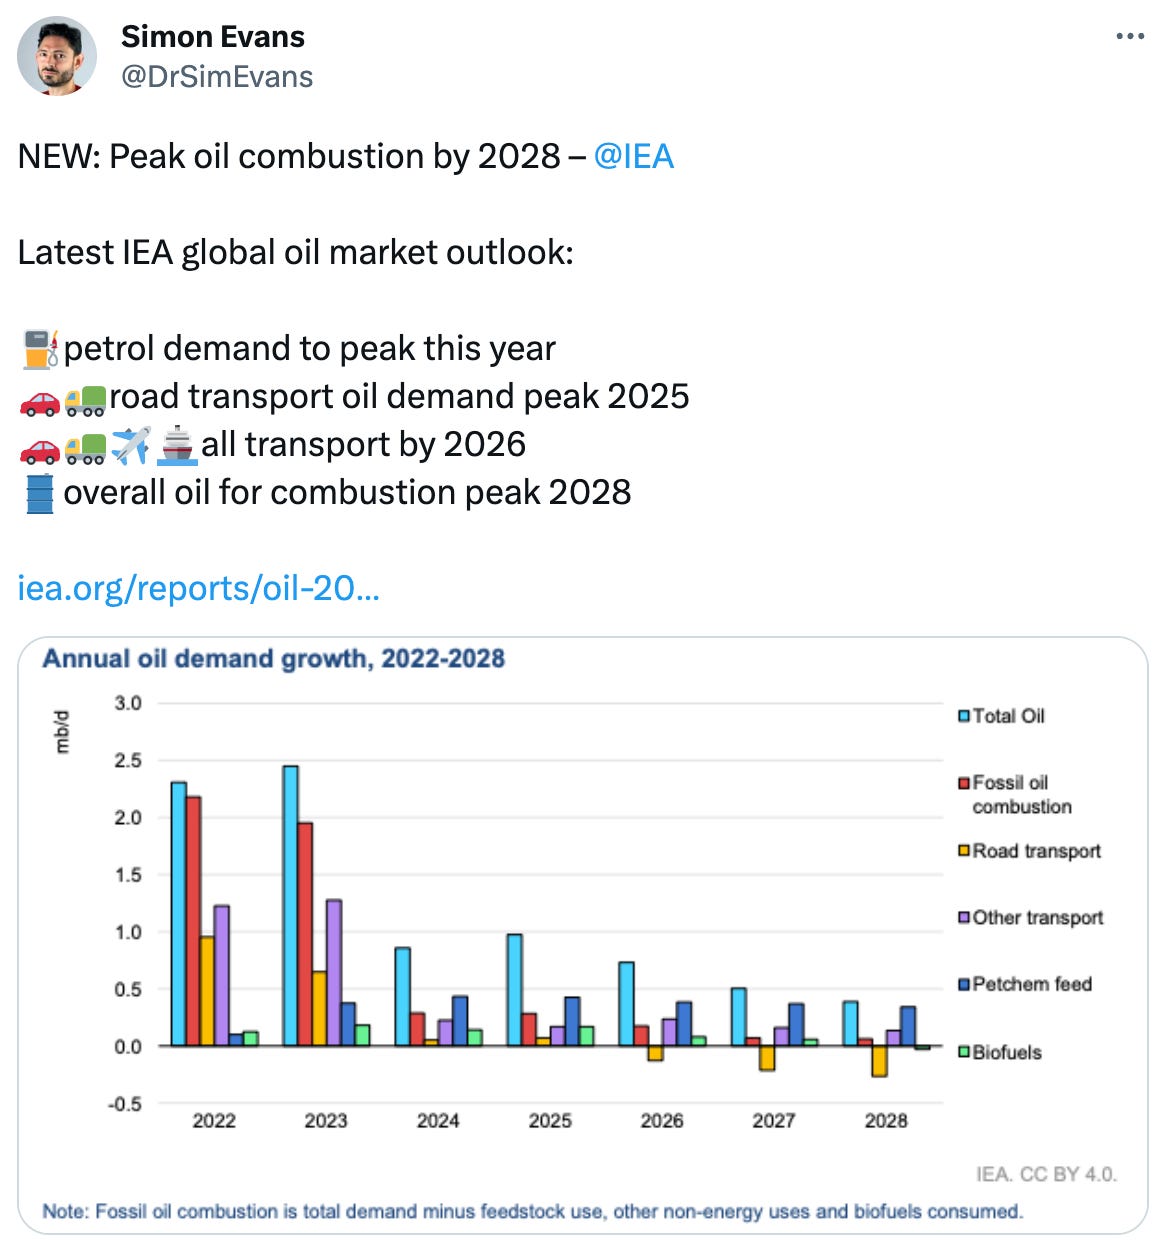  Simon Evans @DrSimEvans NEW: Peak oil combustion by 2028 –  @IEA    Latest IEA global oil market outlook:  ⛽️petrol demand to peak this year 🚗🚛road transport oil demand peak 2025 🚗🚛✈️🚢all transport by 2026 🛢️overall oil for combustion peak 2028  https://iea.org/reports/oil-2023